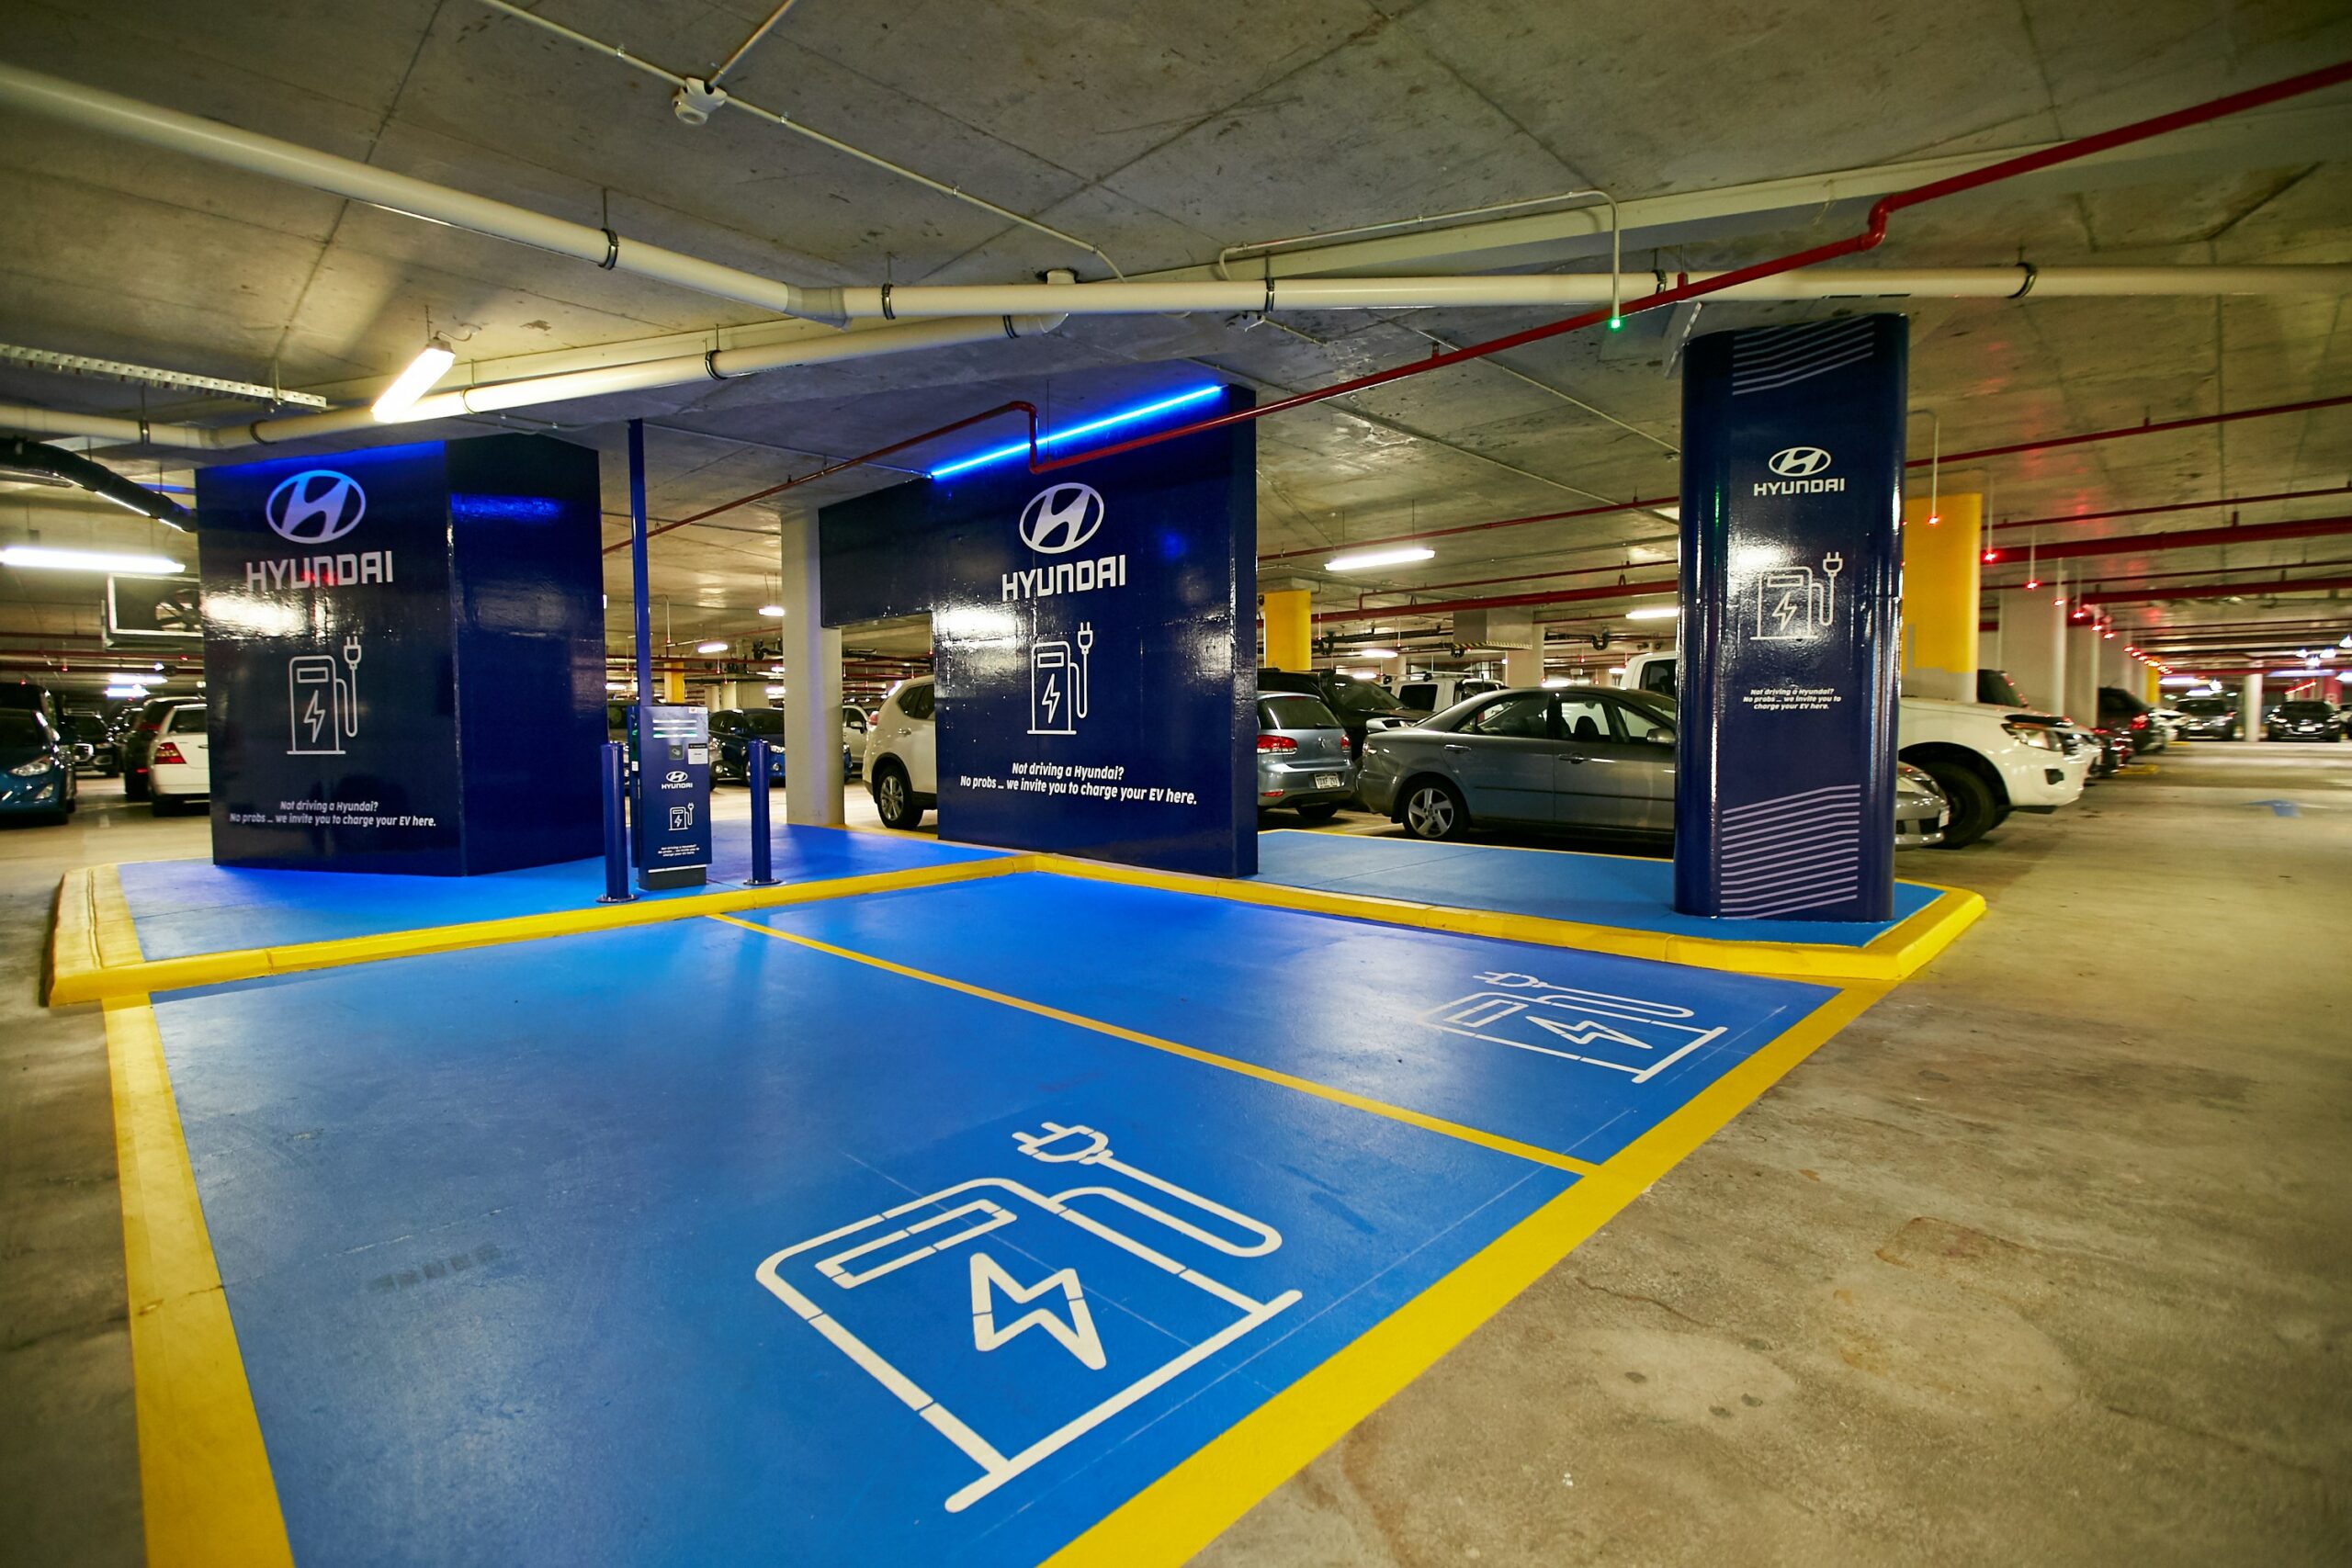 Hyundai powers up the RAC Arena with installation of EV charging station